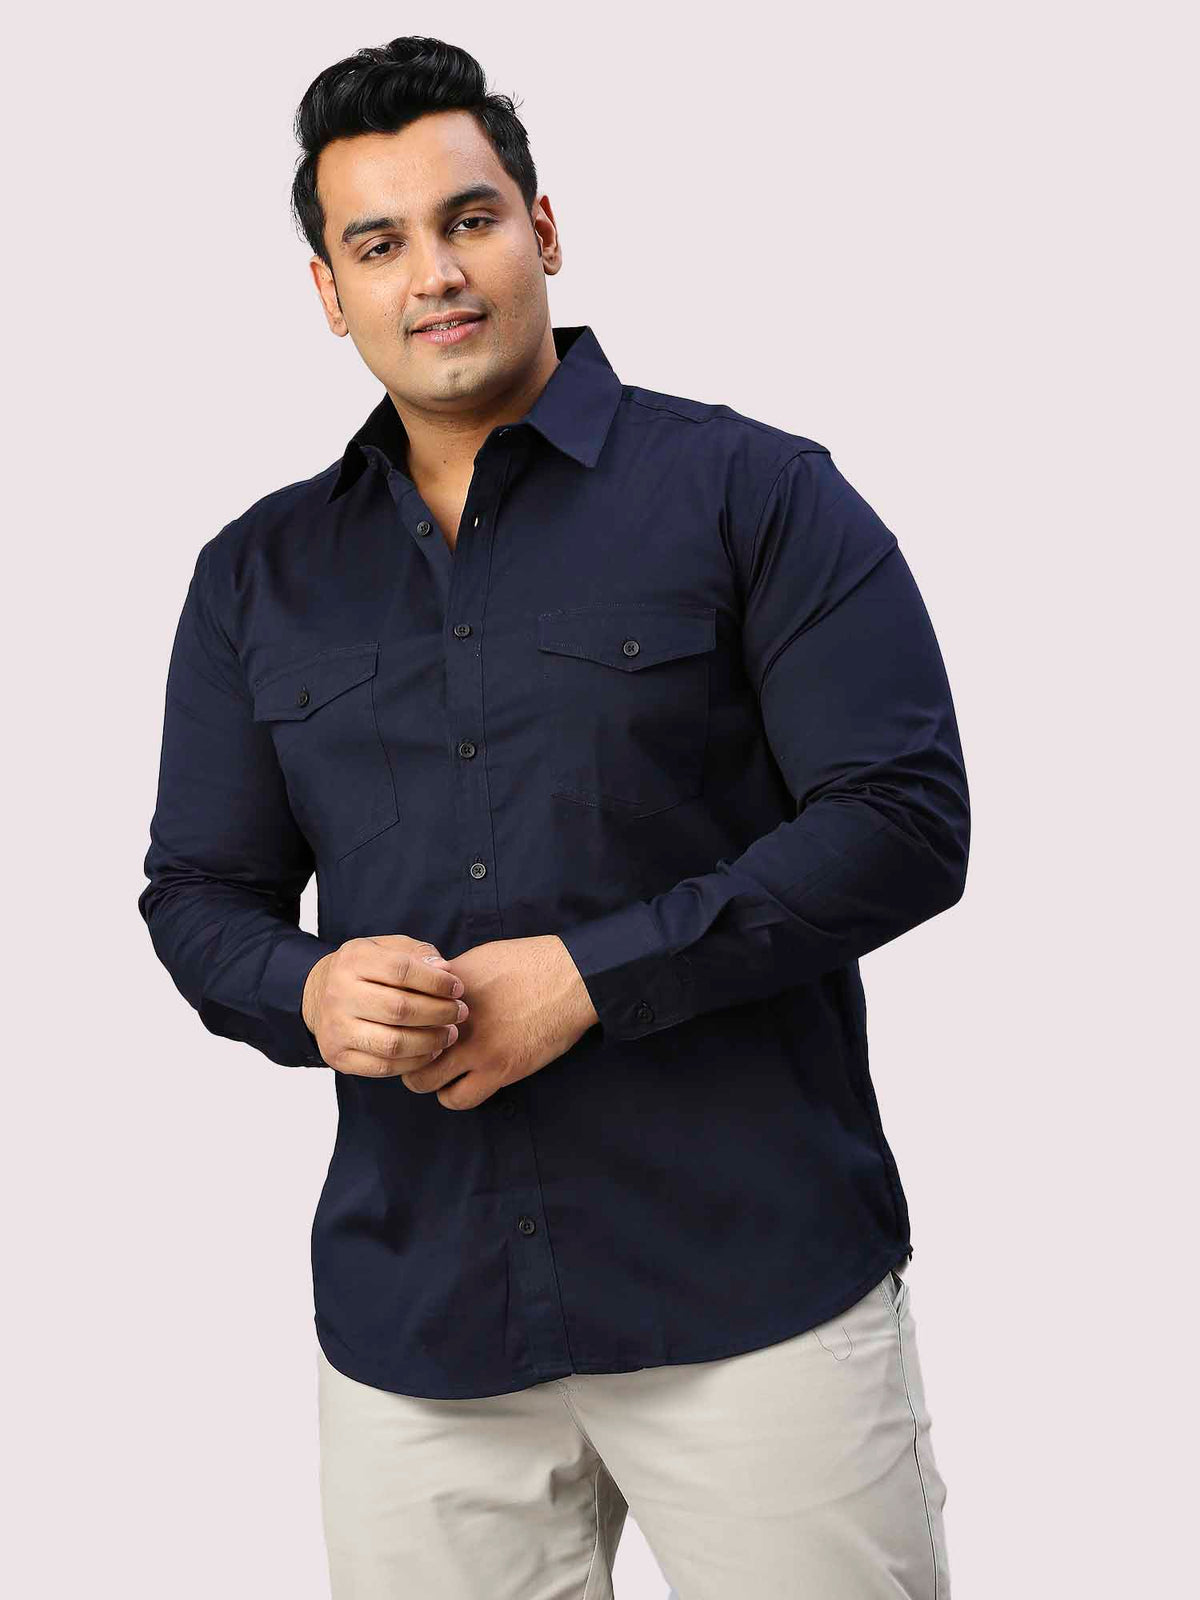 Navy Blue Solid Pure Cotton Double Pocket Full Sleeve Shirt Men's Plus Size